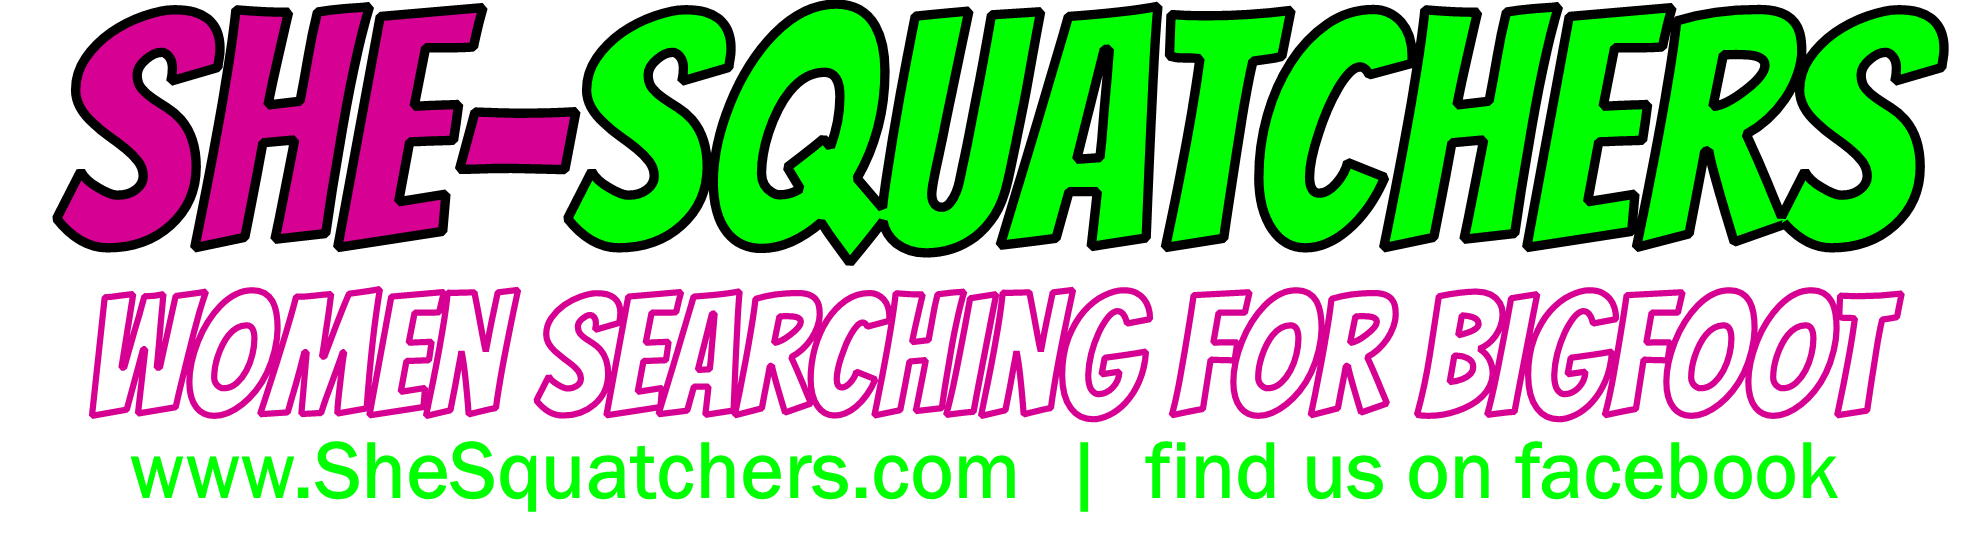 SheSquatchers - women searching for bigfoot - Remote Viewing Bigfoot - actual footage - TheJourneyRadioShow.com